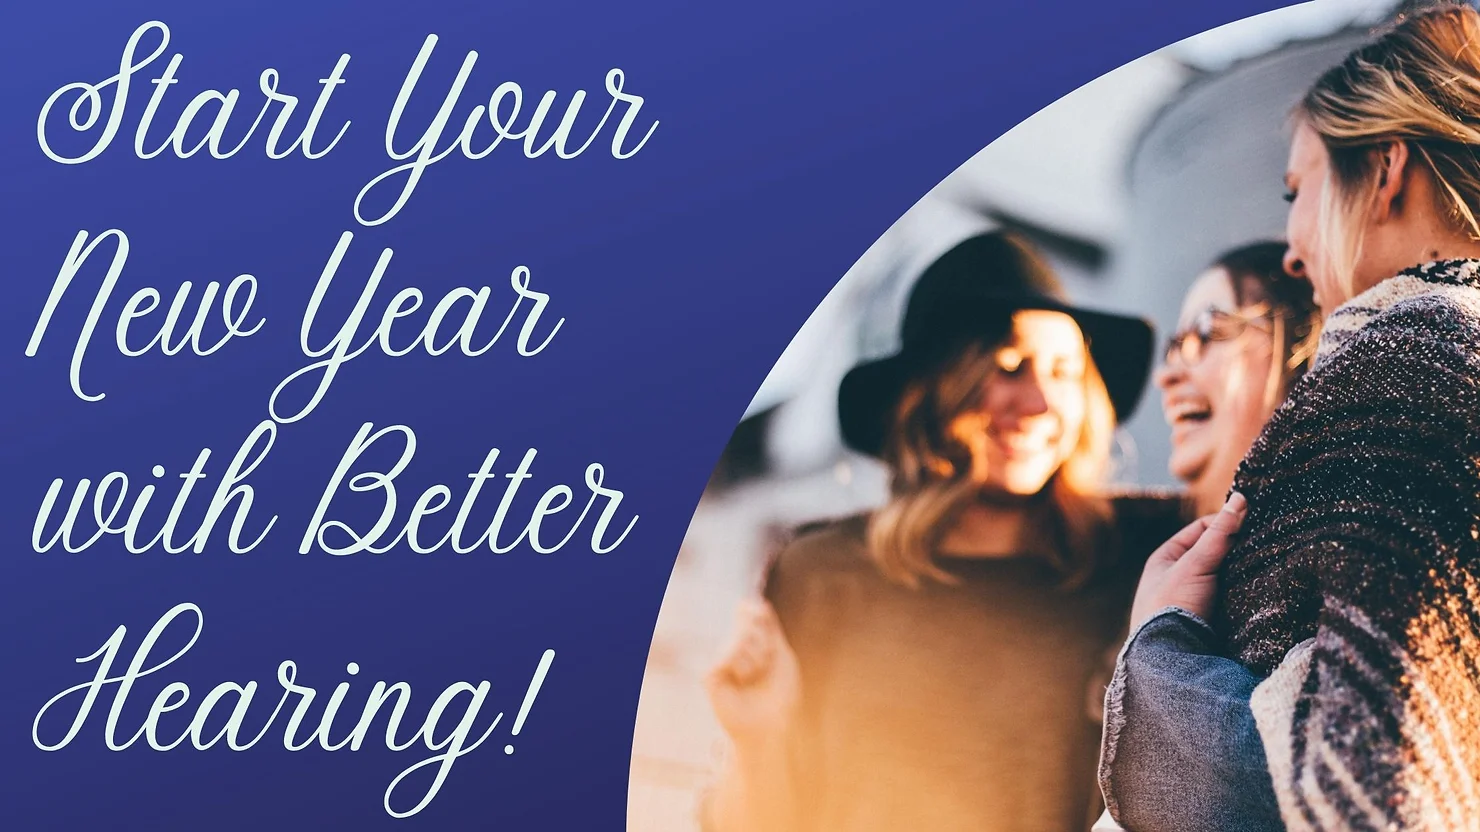 Featured image for “Start Your New Year with Better Hearing!”